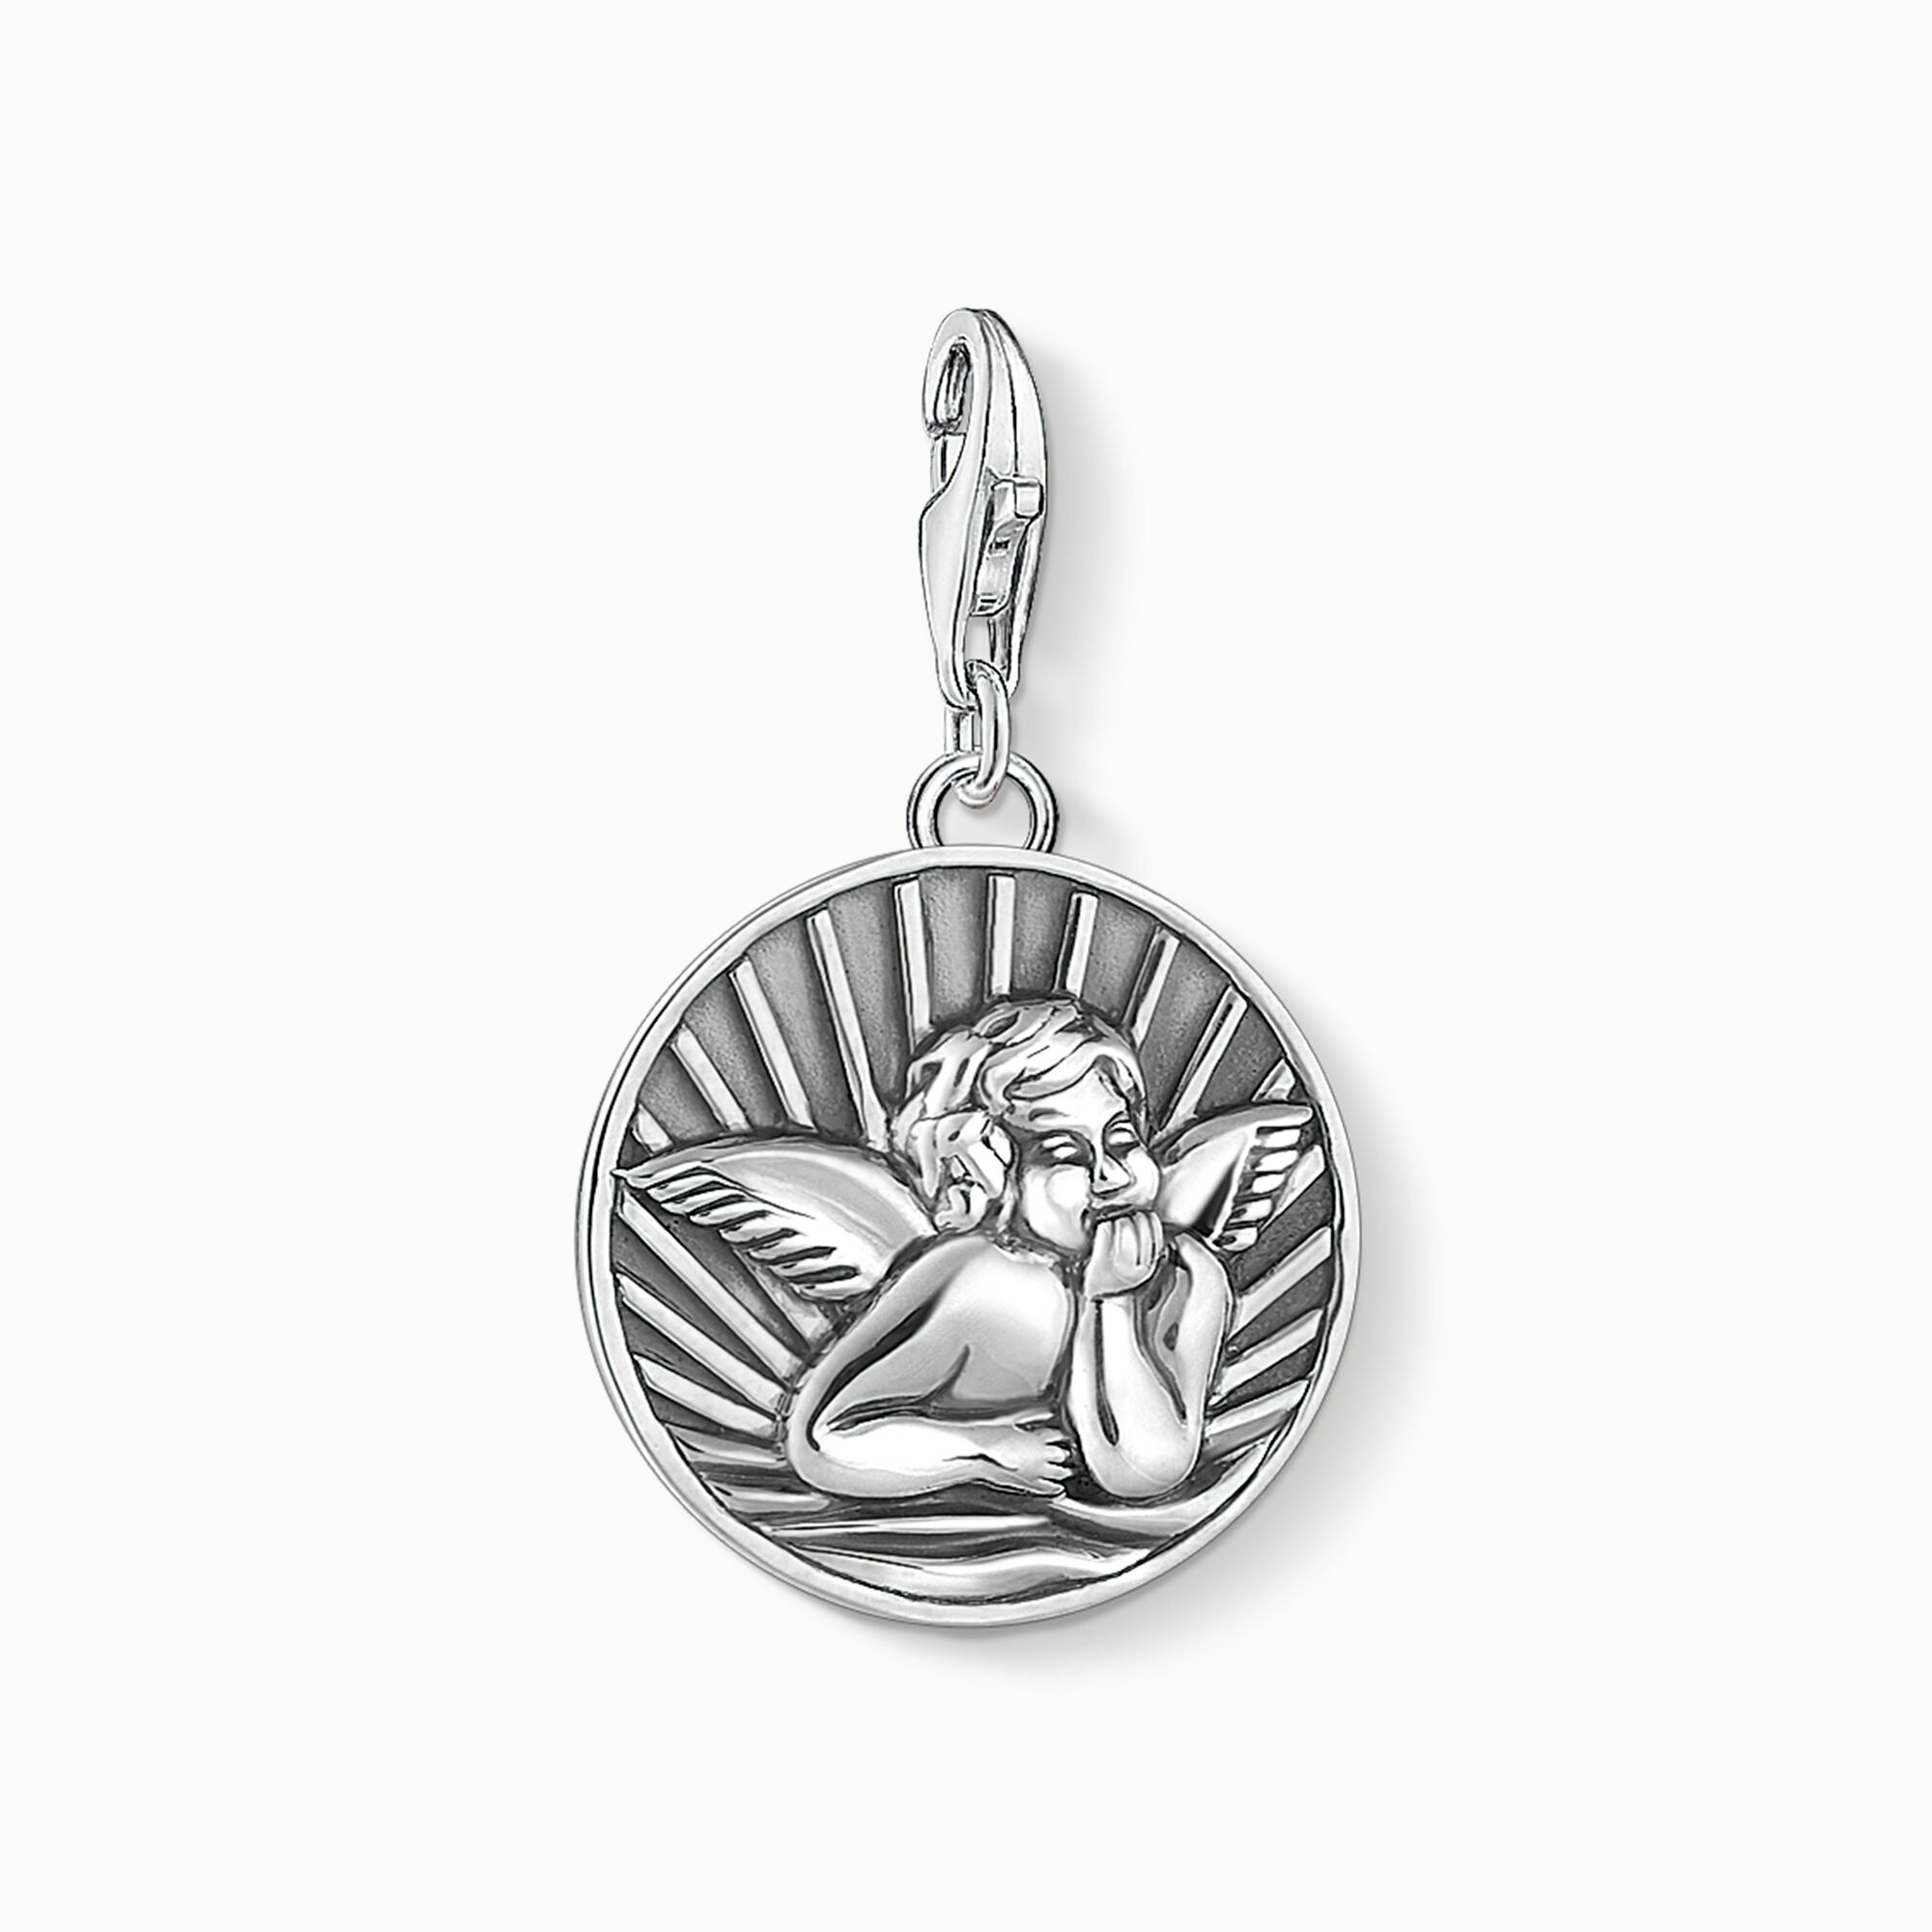 Charm pendant disc guardian angel from the Charm Club collection in the THOMAS SABO online store